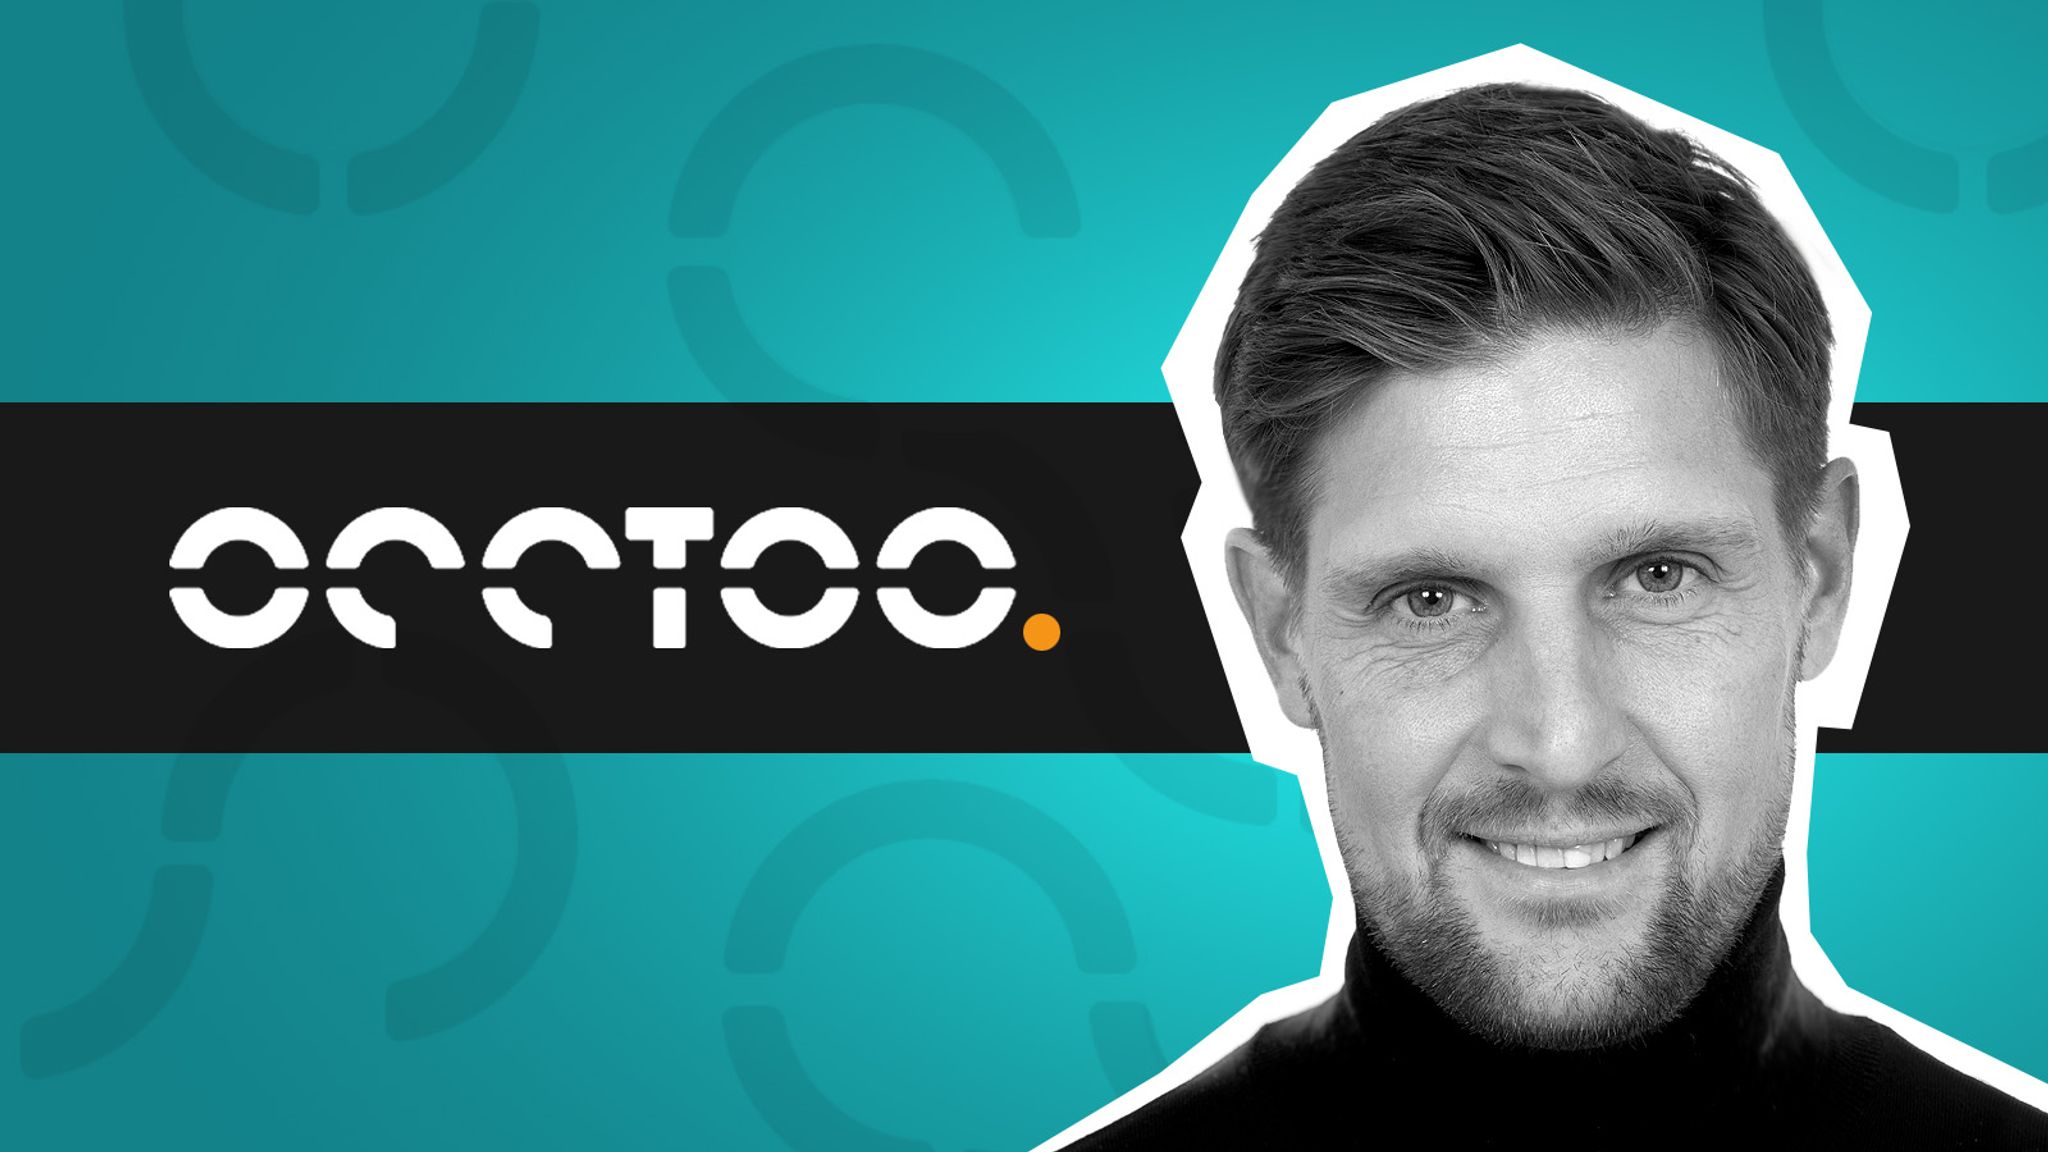 Occtoo featured graphic with headshot of Niclas Mollin and Occtoo logo